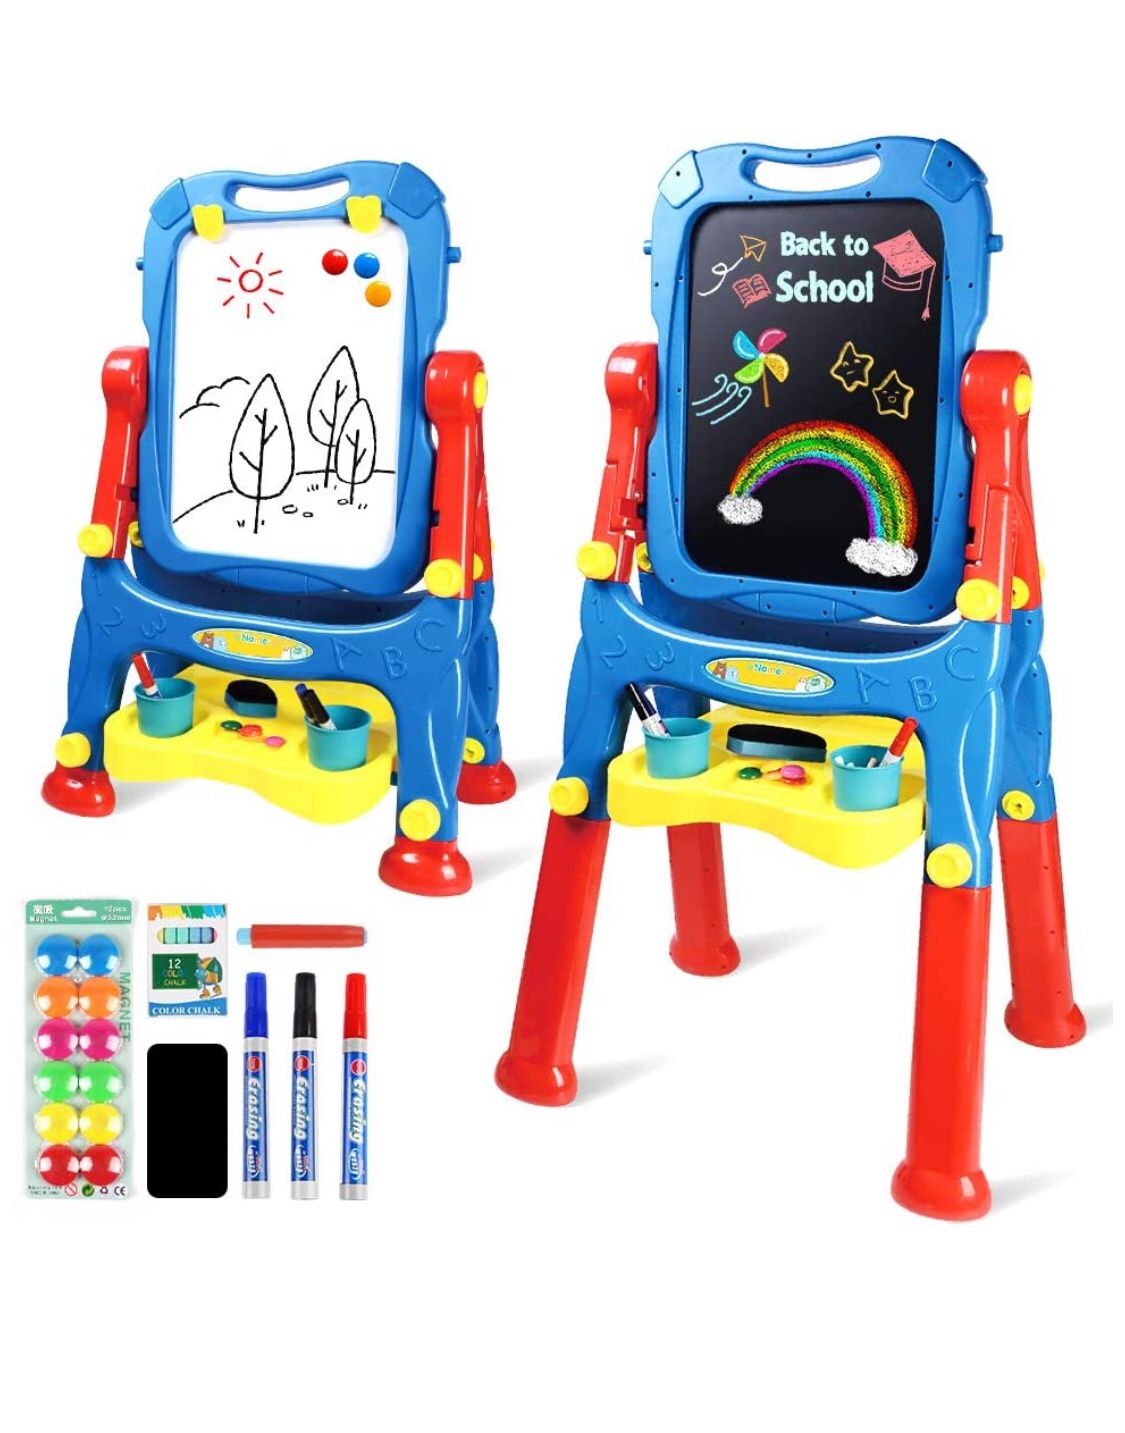 Drawing Board Toys for Boys & Girls Kids Art Easel for Toddlers with Magnetic Whiteboard & Chalkboard, Blue